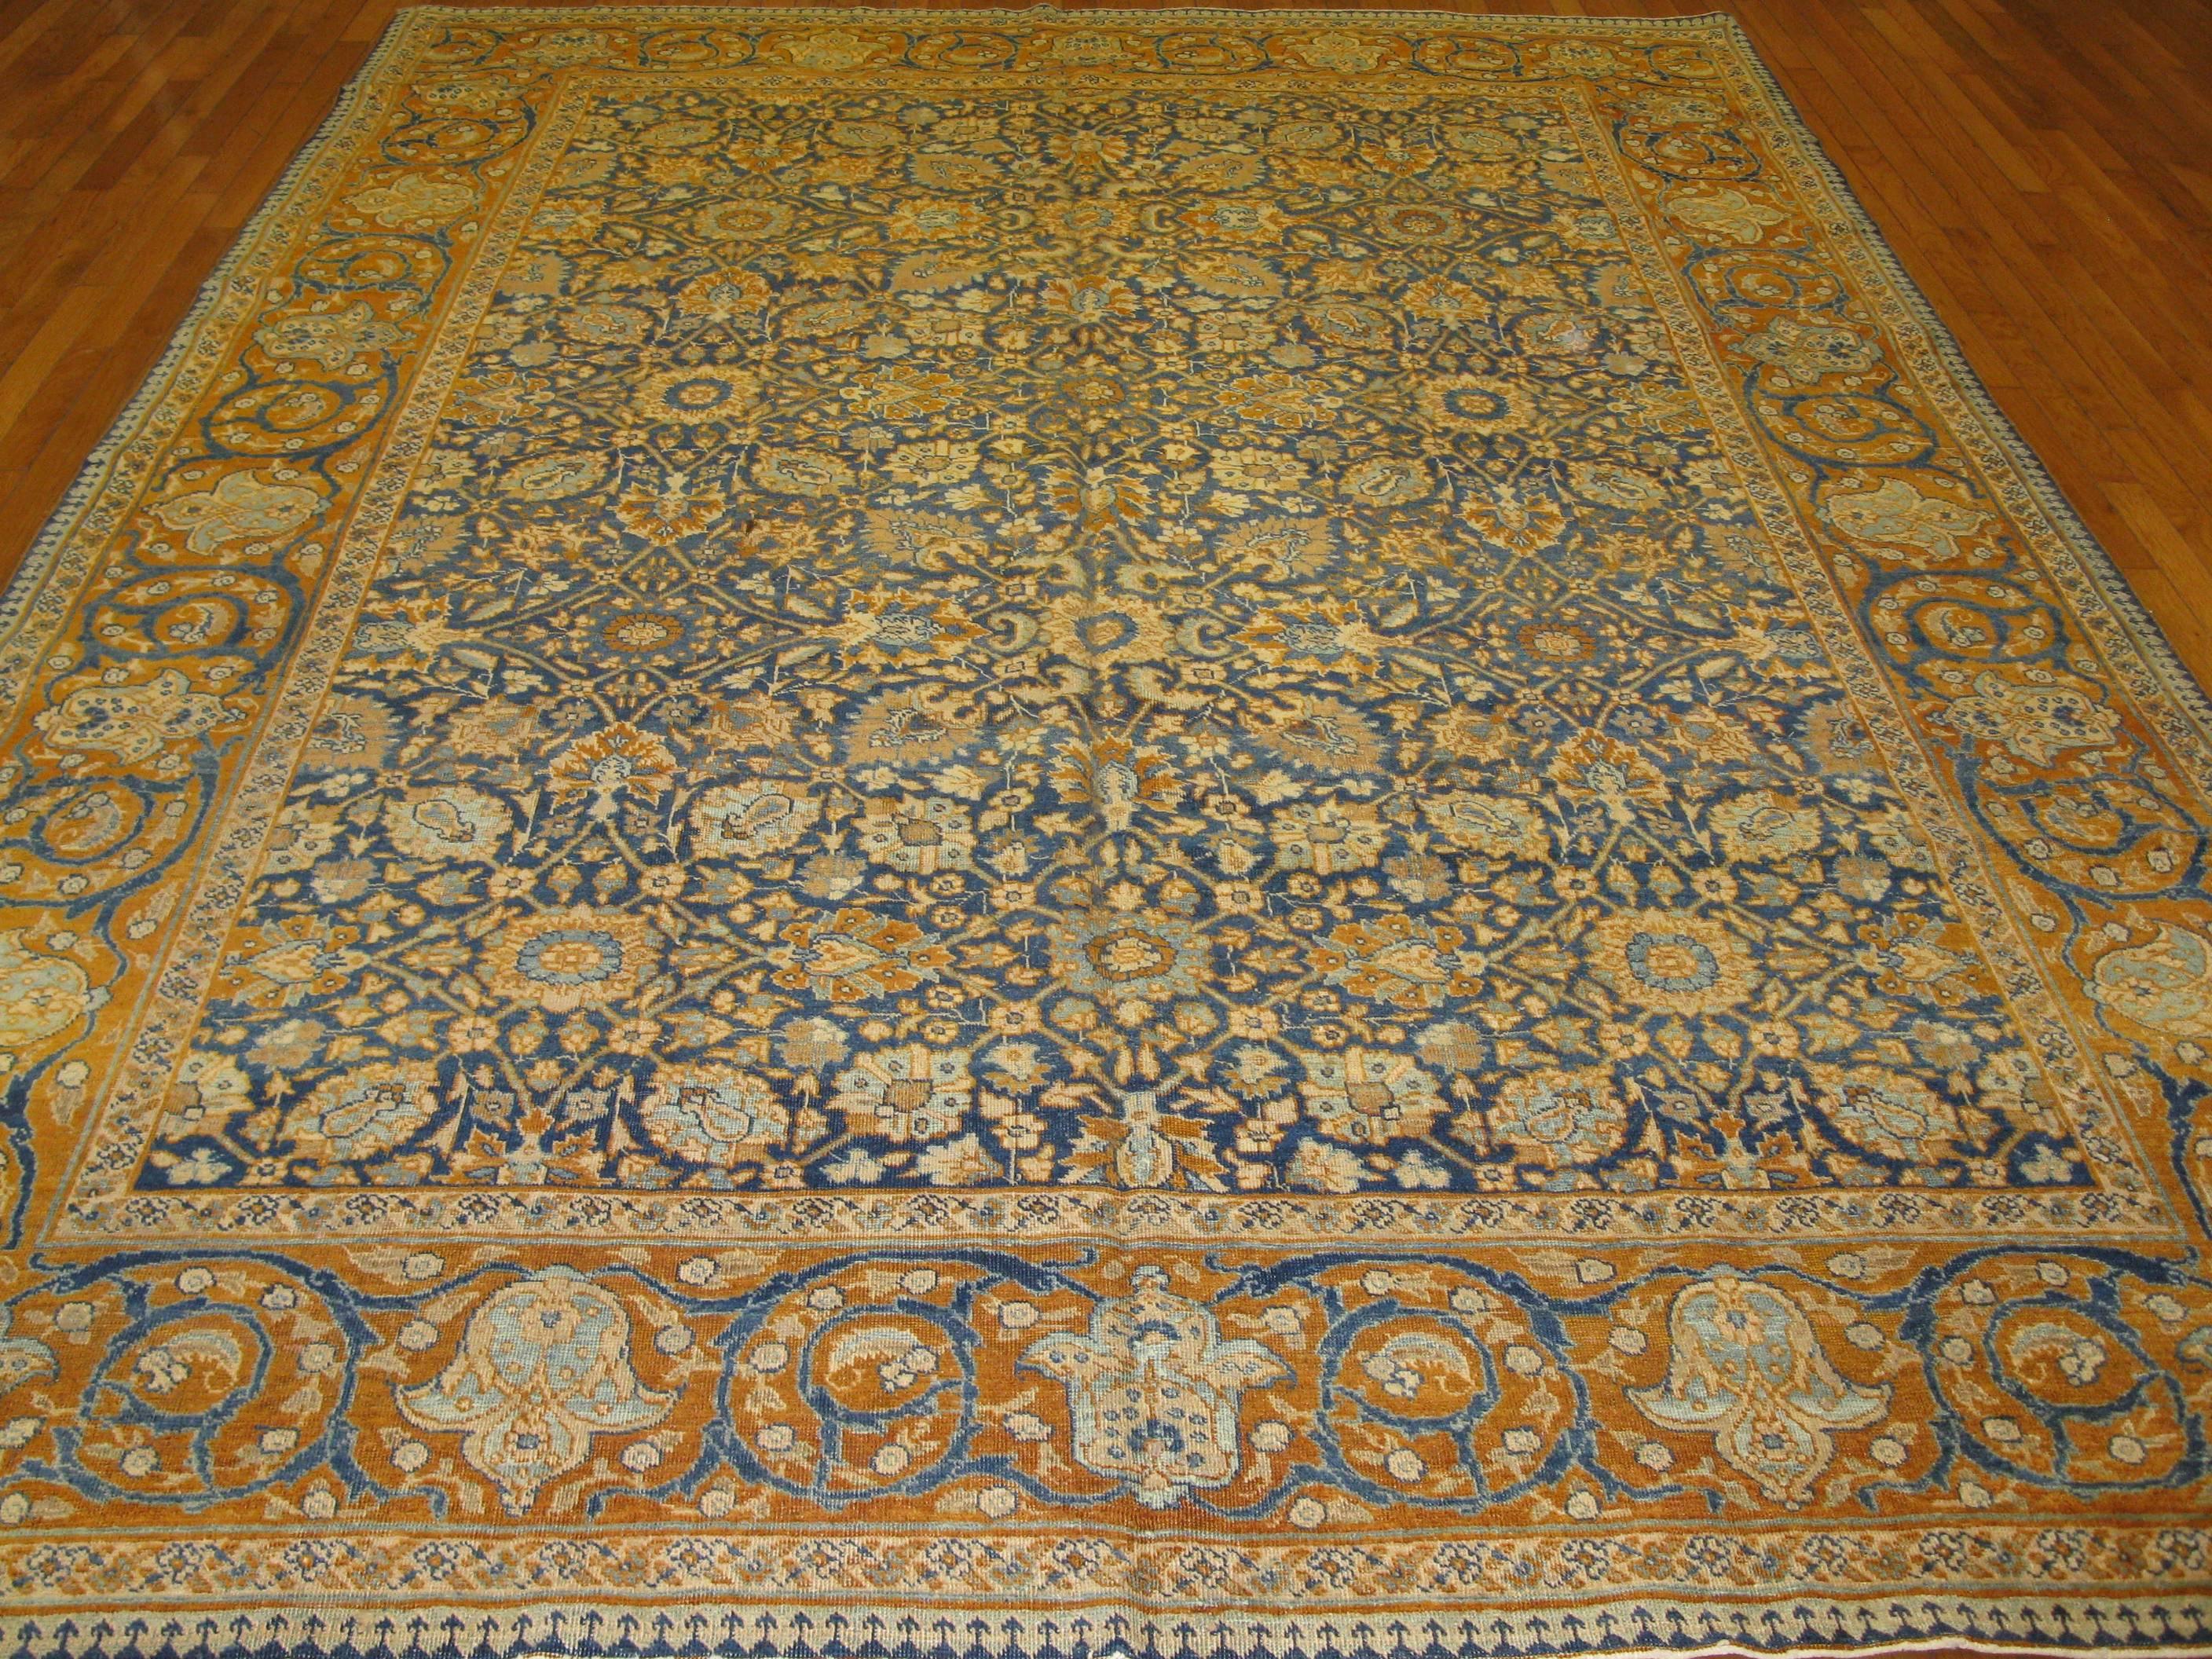 This is a fantastic example of the turn of the century Persian Tabriz rugs. It has a rich and elegant look. The rug is made of wool and cotton with natural dyes. It measures 7'8'' x 10' and in excellent condition.